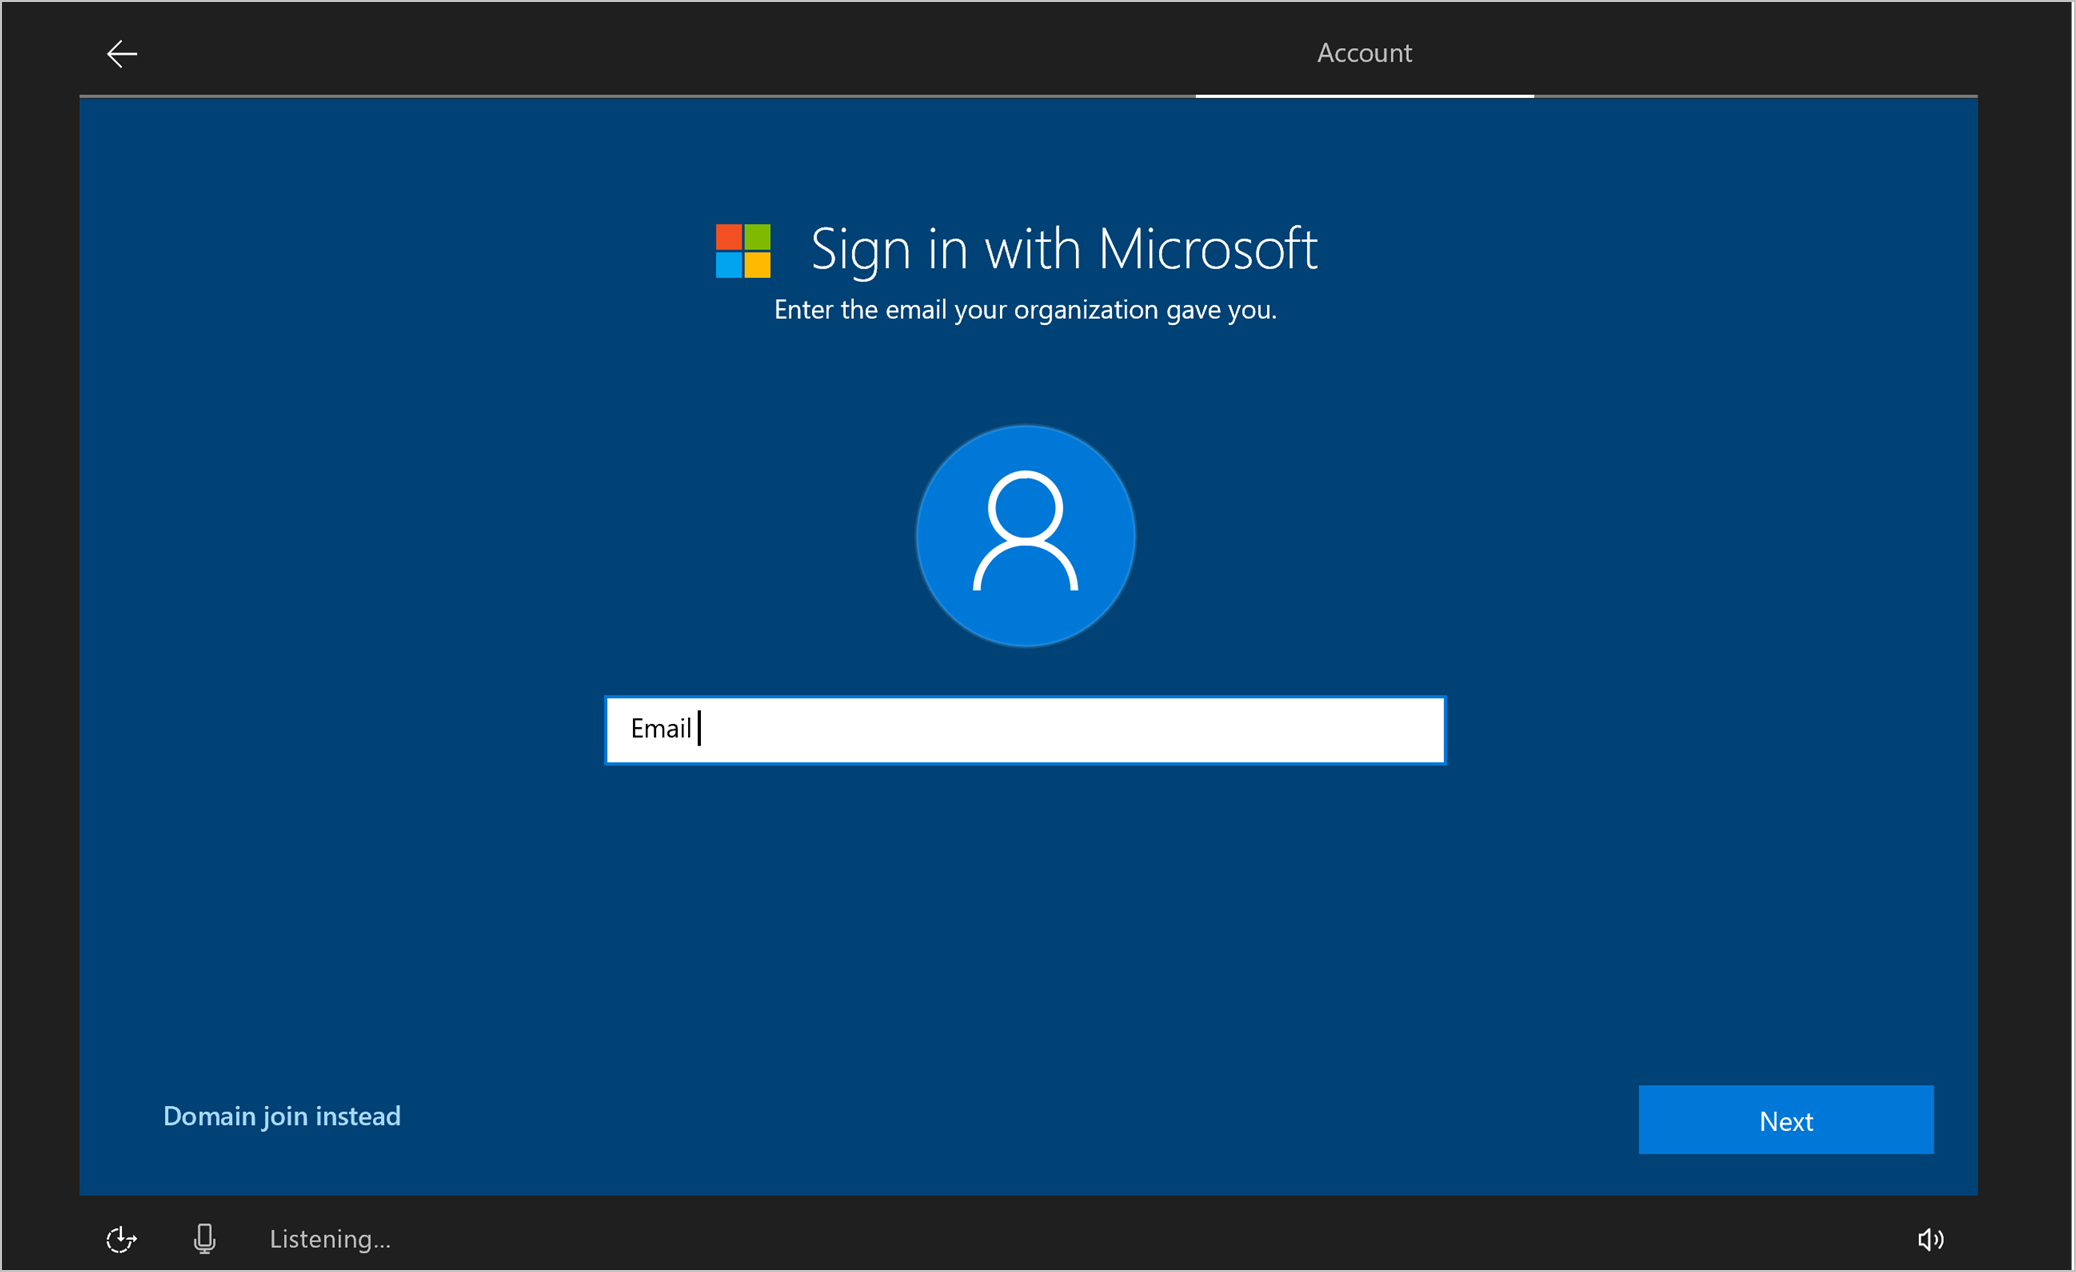 Example screenshot of the Sign in with Microsoft screen, with Microsoft logo, and an empty Email field.